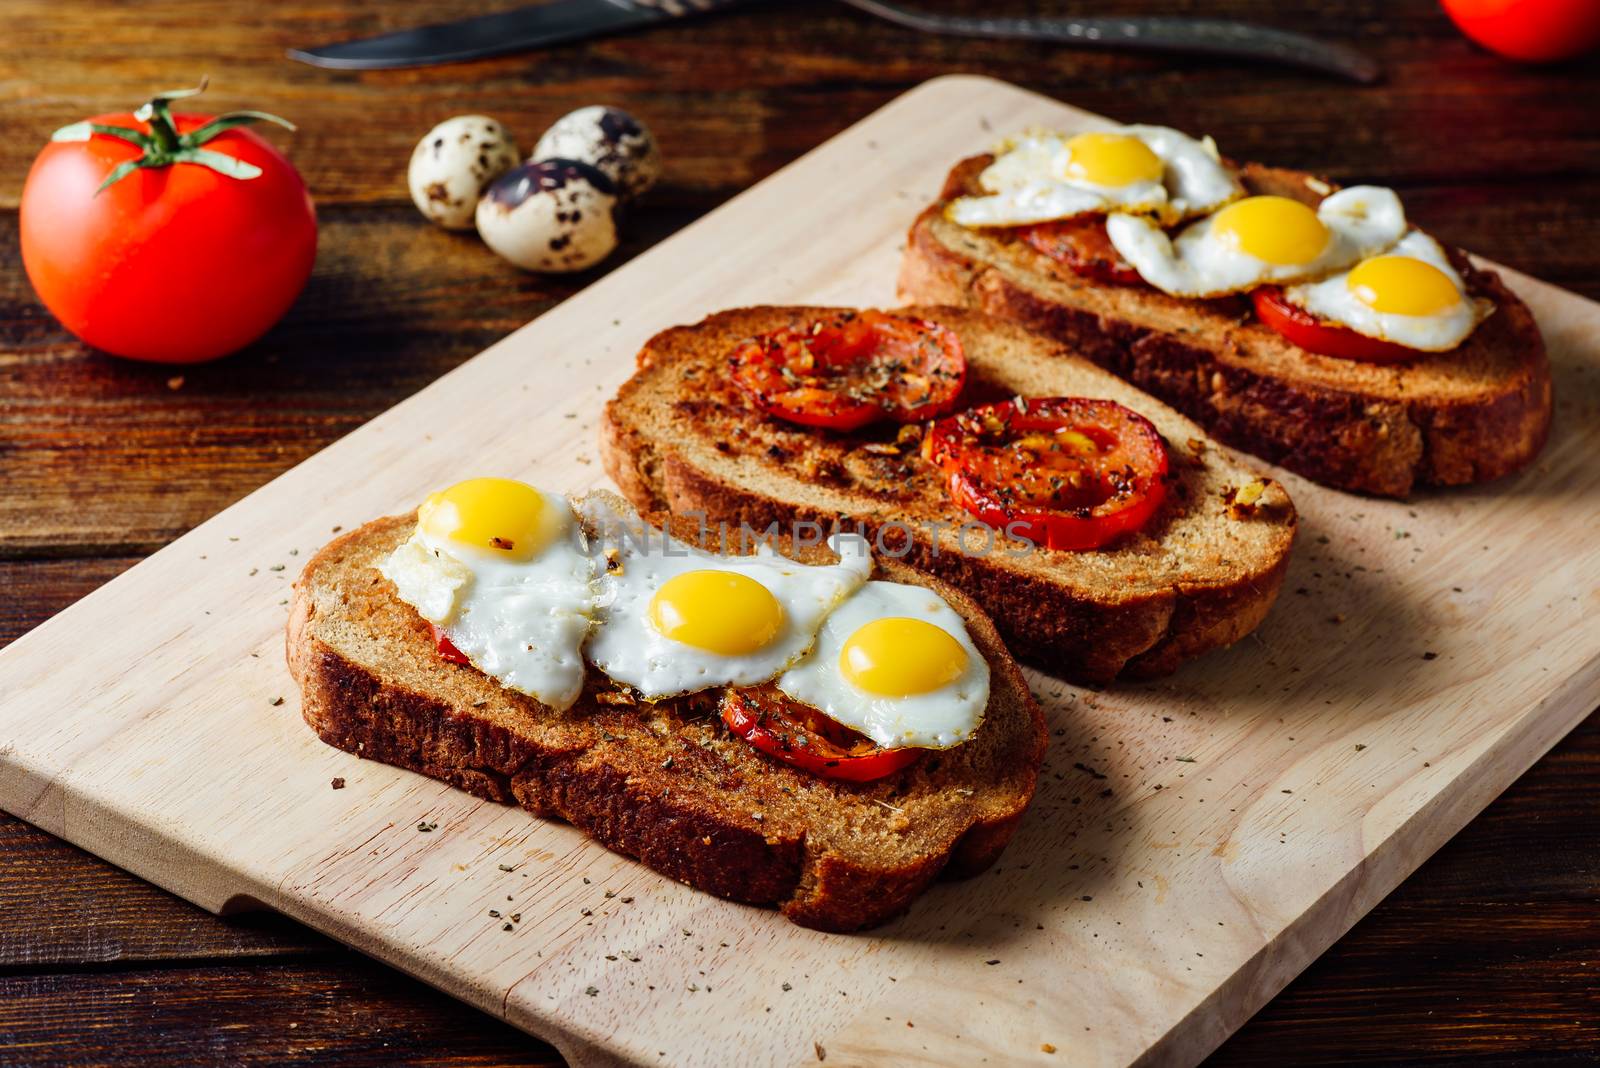 Toasts with Fried Tomatoes and Quail Eggs